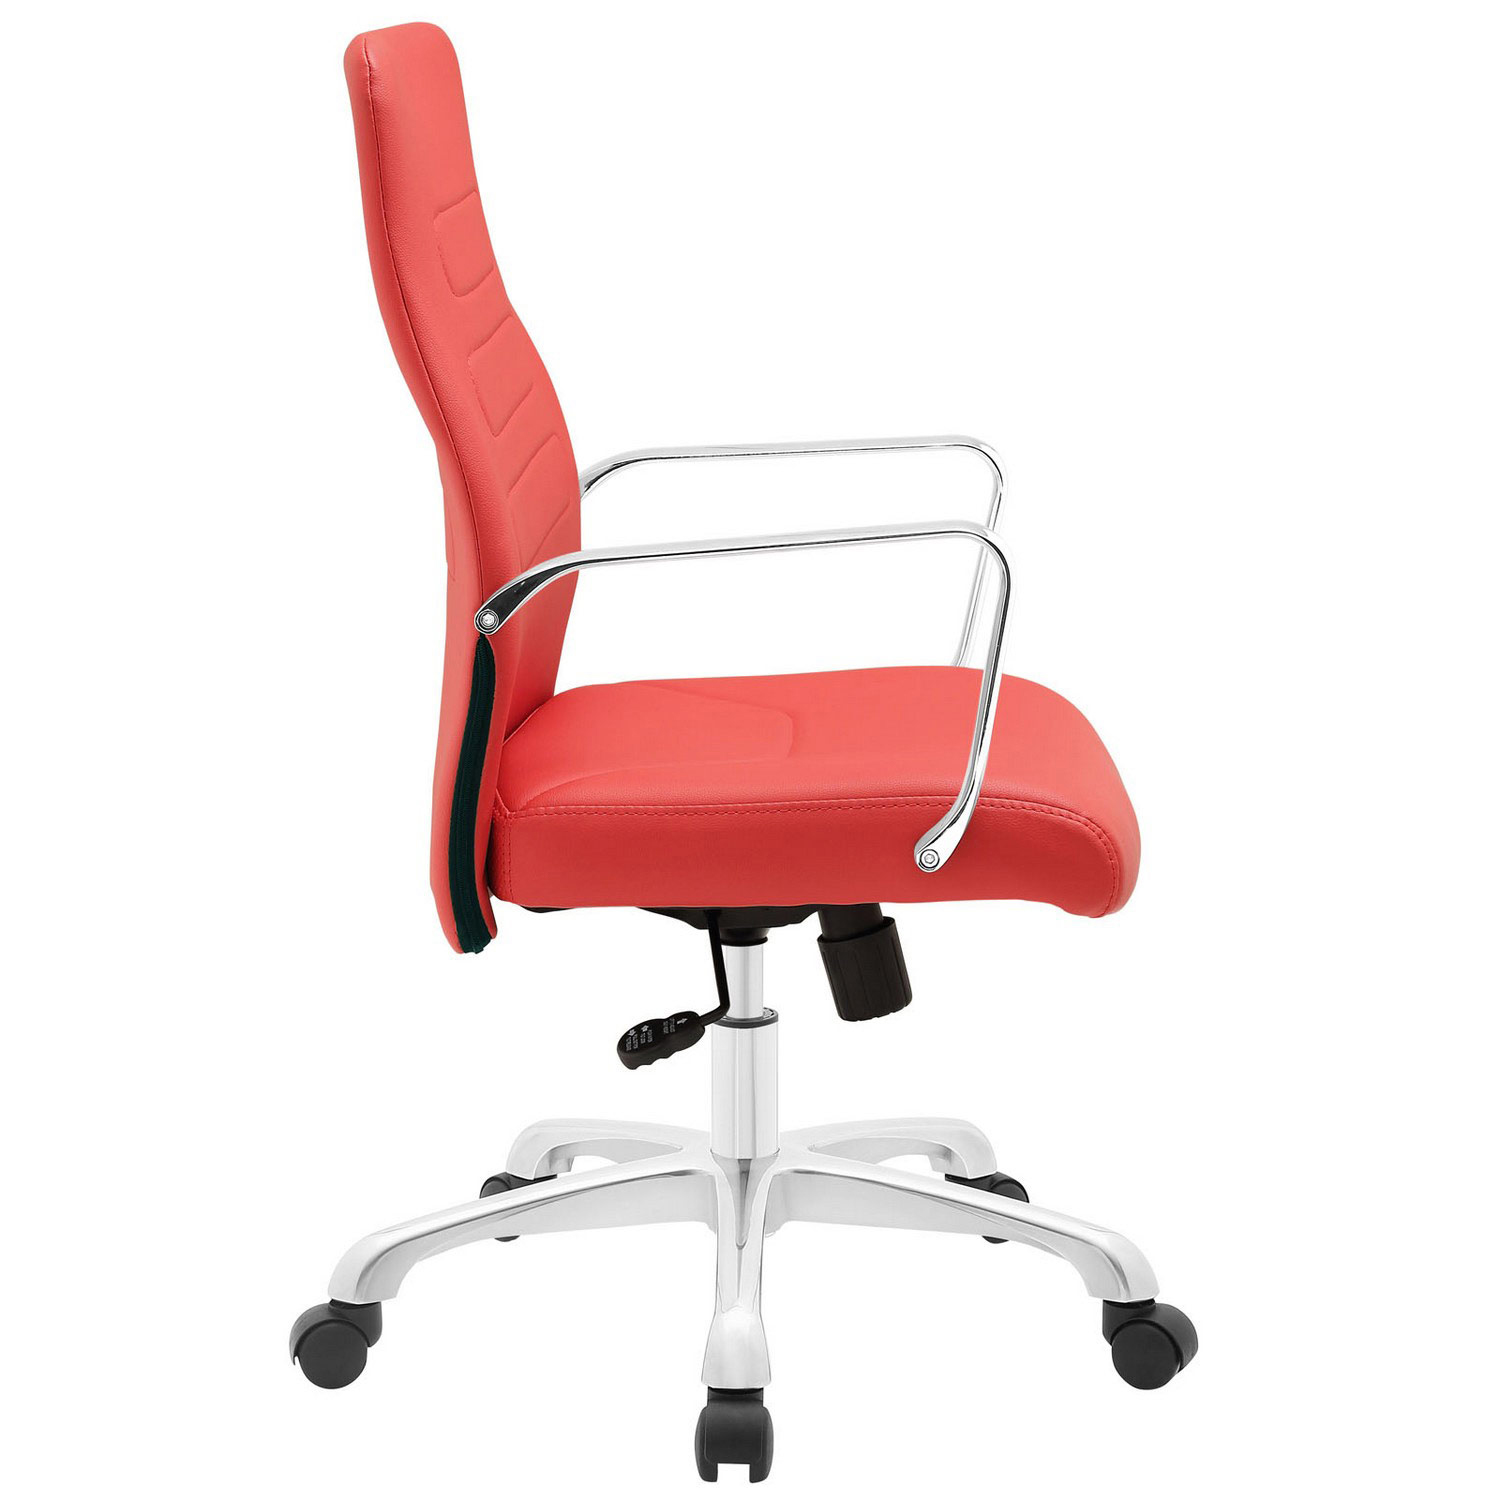 Modway Depict Mid Back Aluminum Office Chair - Red